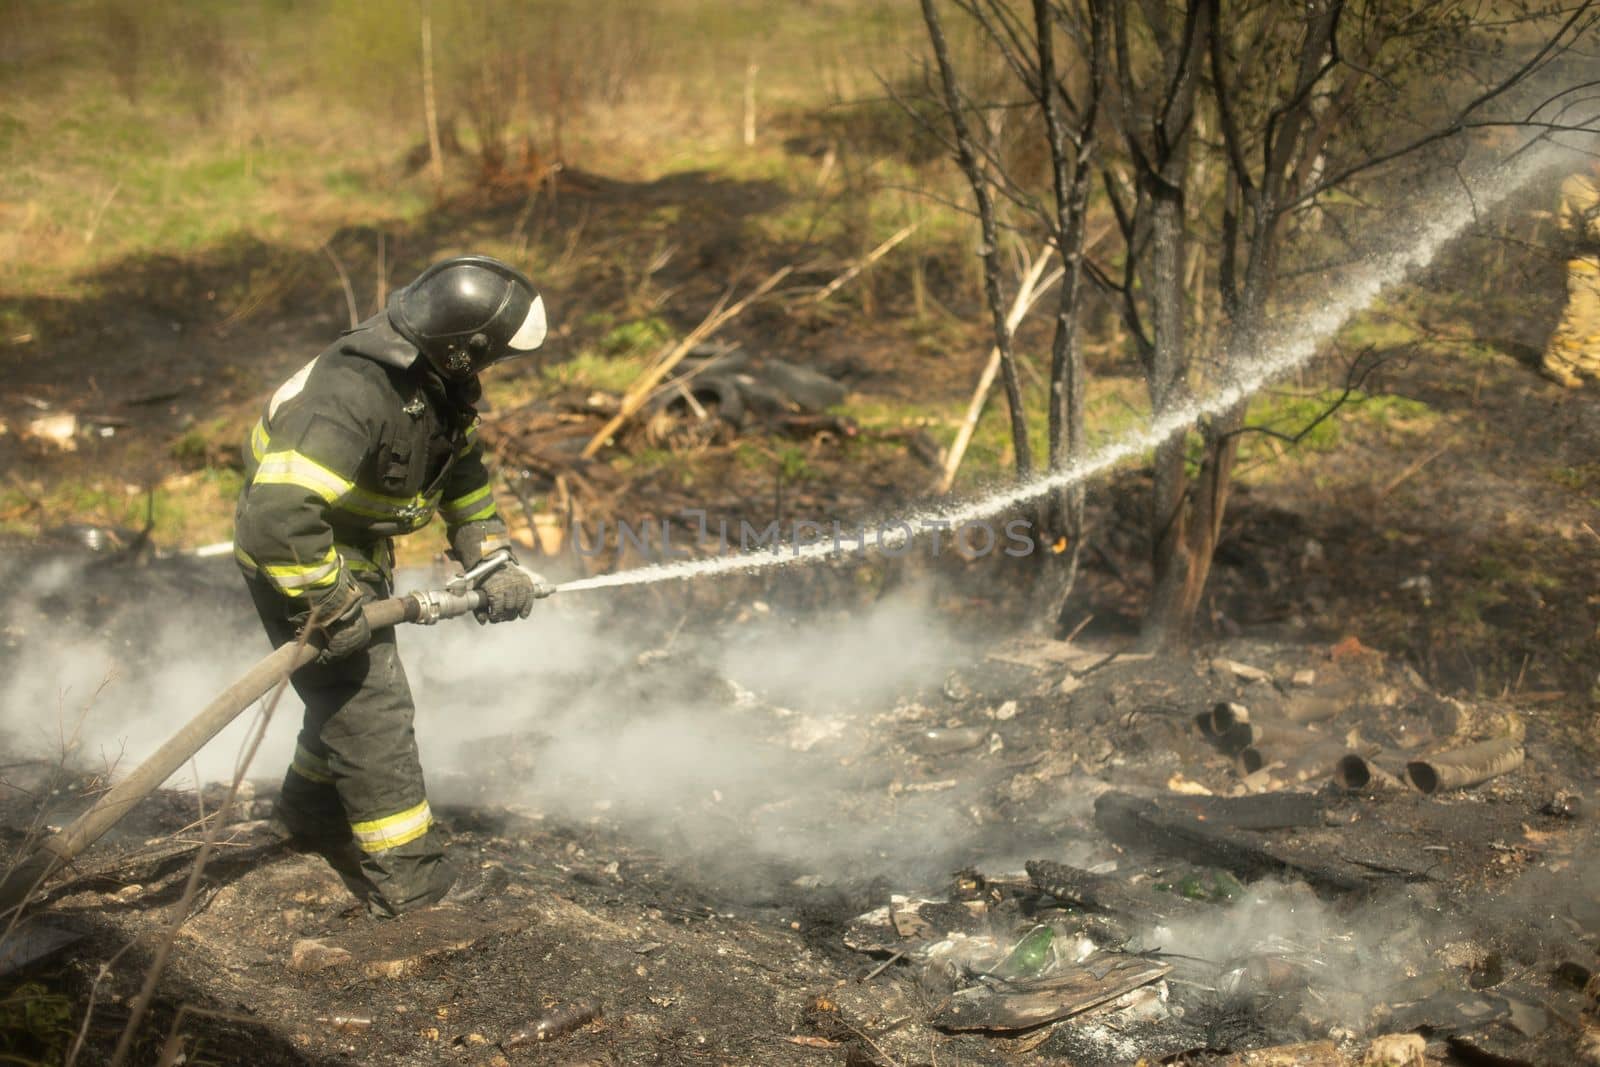 Firefighter puts out fire in woods. Lifeguard pours water. Fire in nature. Smoke and fire.